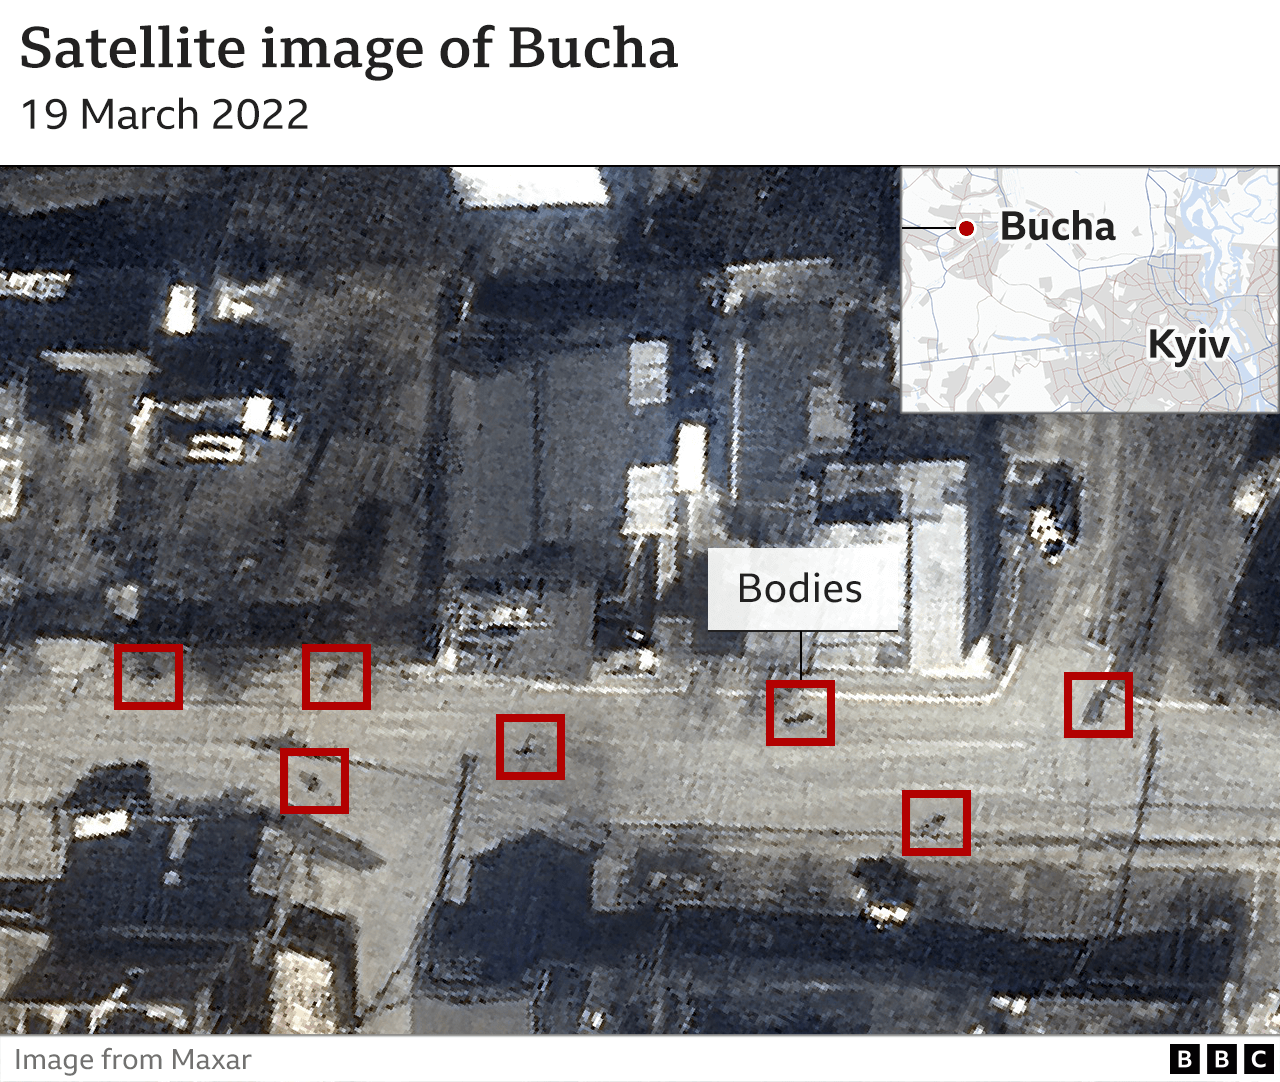 Satellite image of the bodies of alleged civilians in the streets in Bucha, Ukraine on 19 March